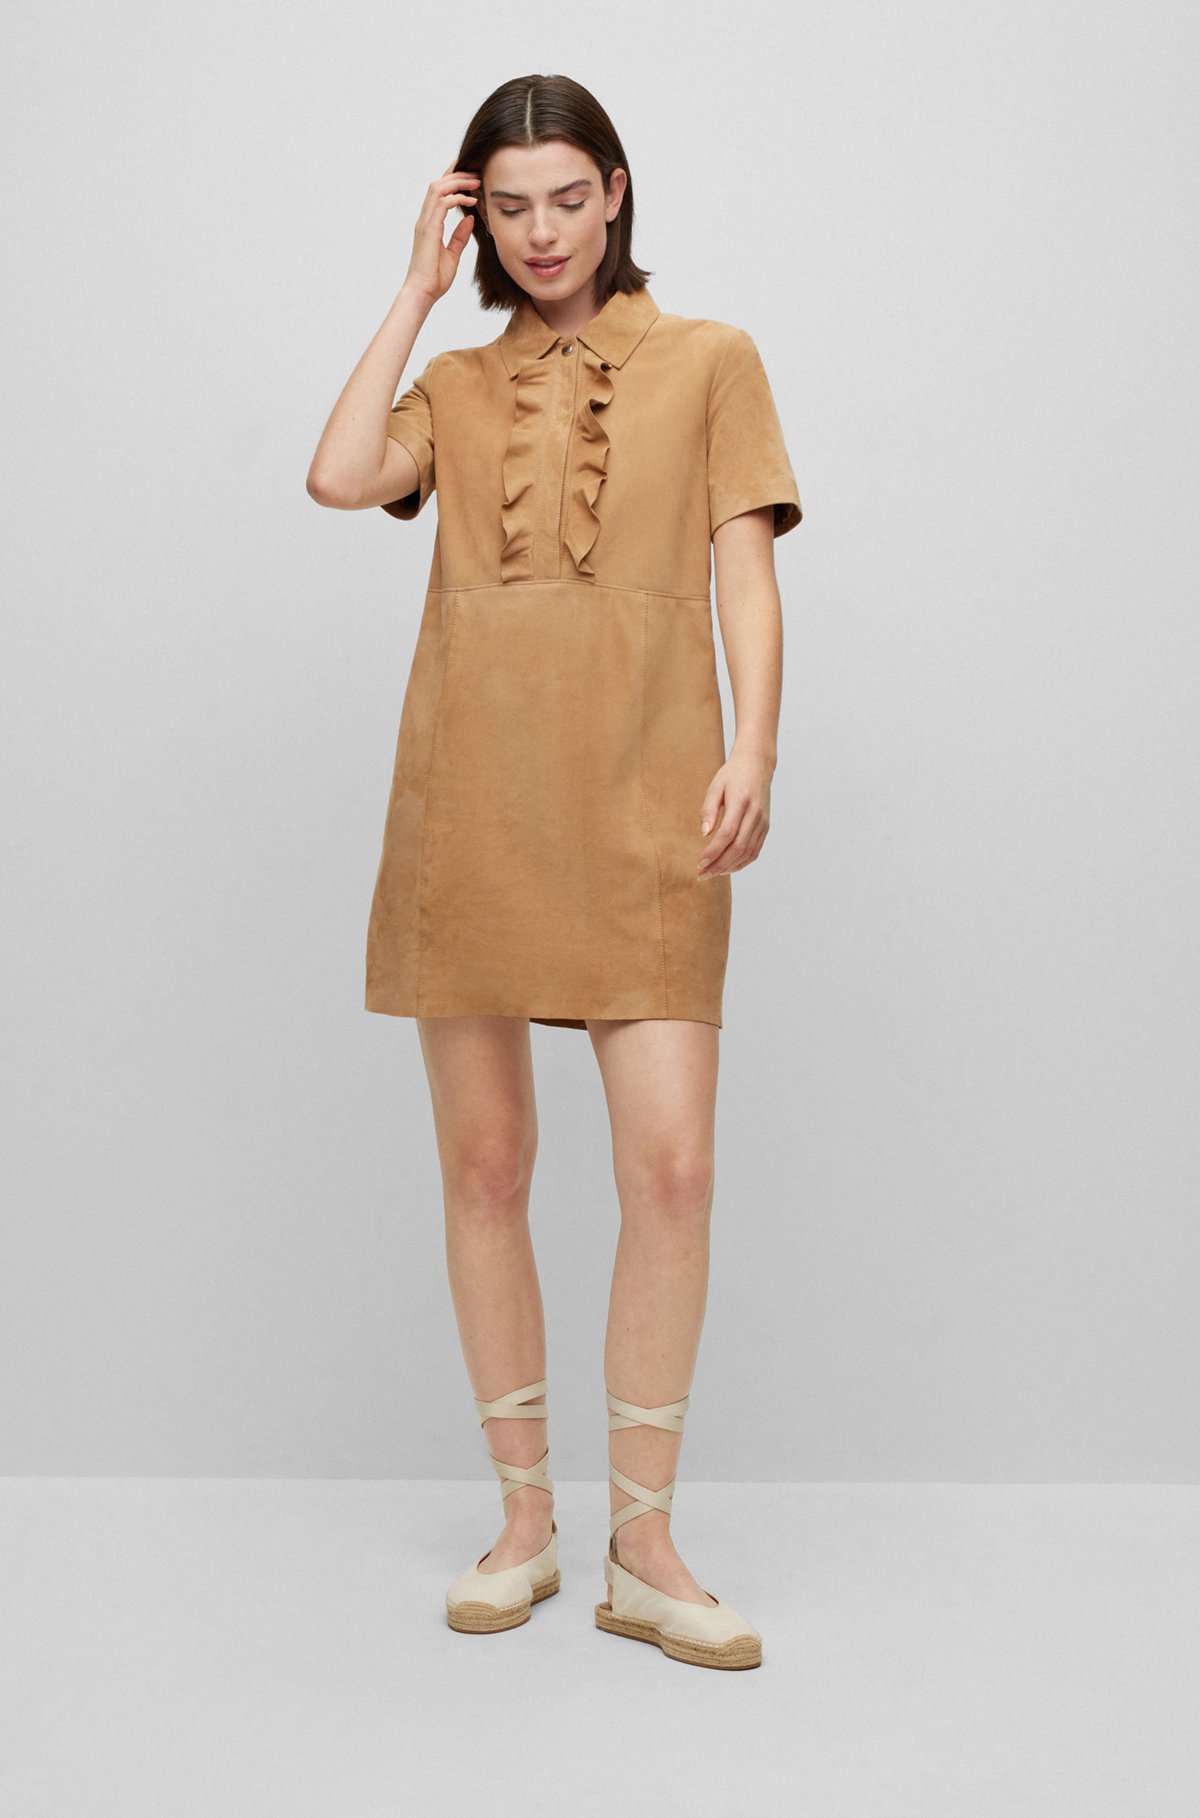 Slim-fit shift dress in suede with frill detail, Light Beige